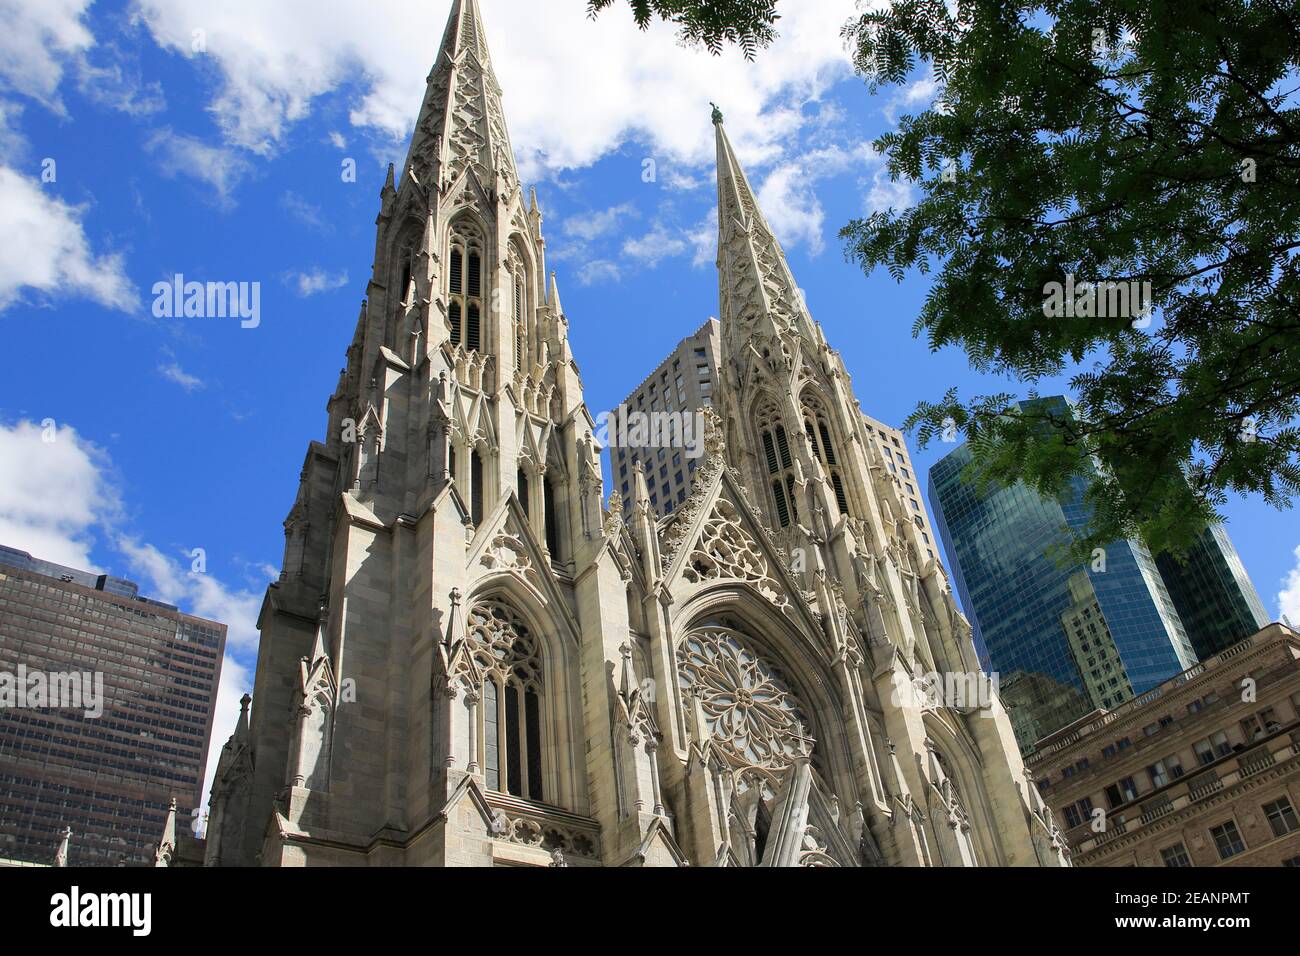 St. Patrick's Cathedral, 5th Avenue, Midtown, Manhattan, New York City, New York, United States of America, North America Stock Photo